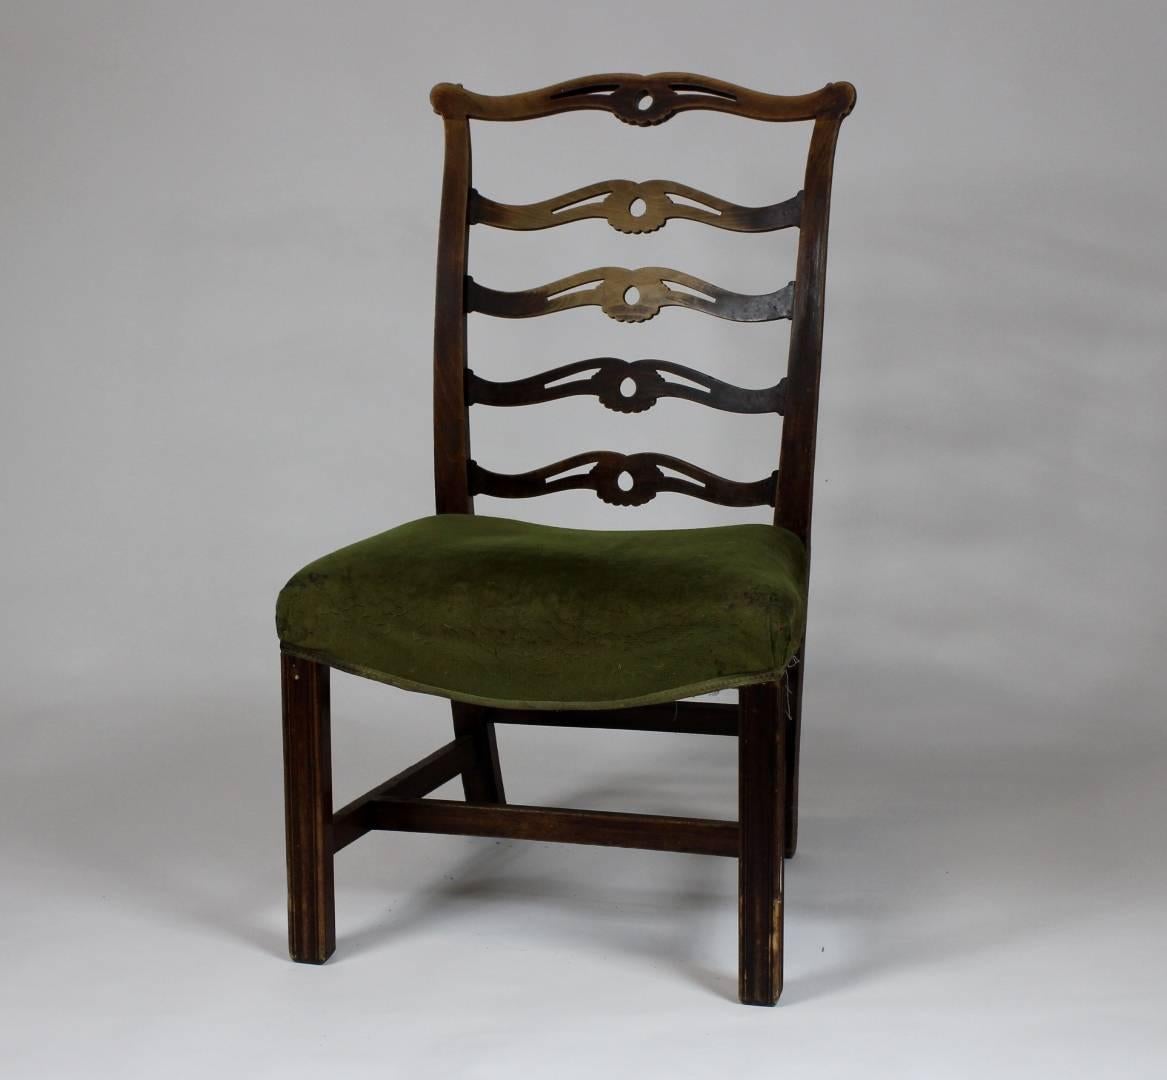 Dining room chair made in the first third of the 20th century, solid wood construction on four legs, with horizontal stretchers and vertical slats, the upholstered seat covered with original textile fabric. The chair has not been restored, it is in